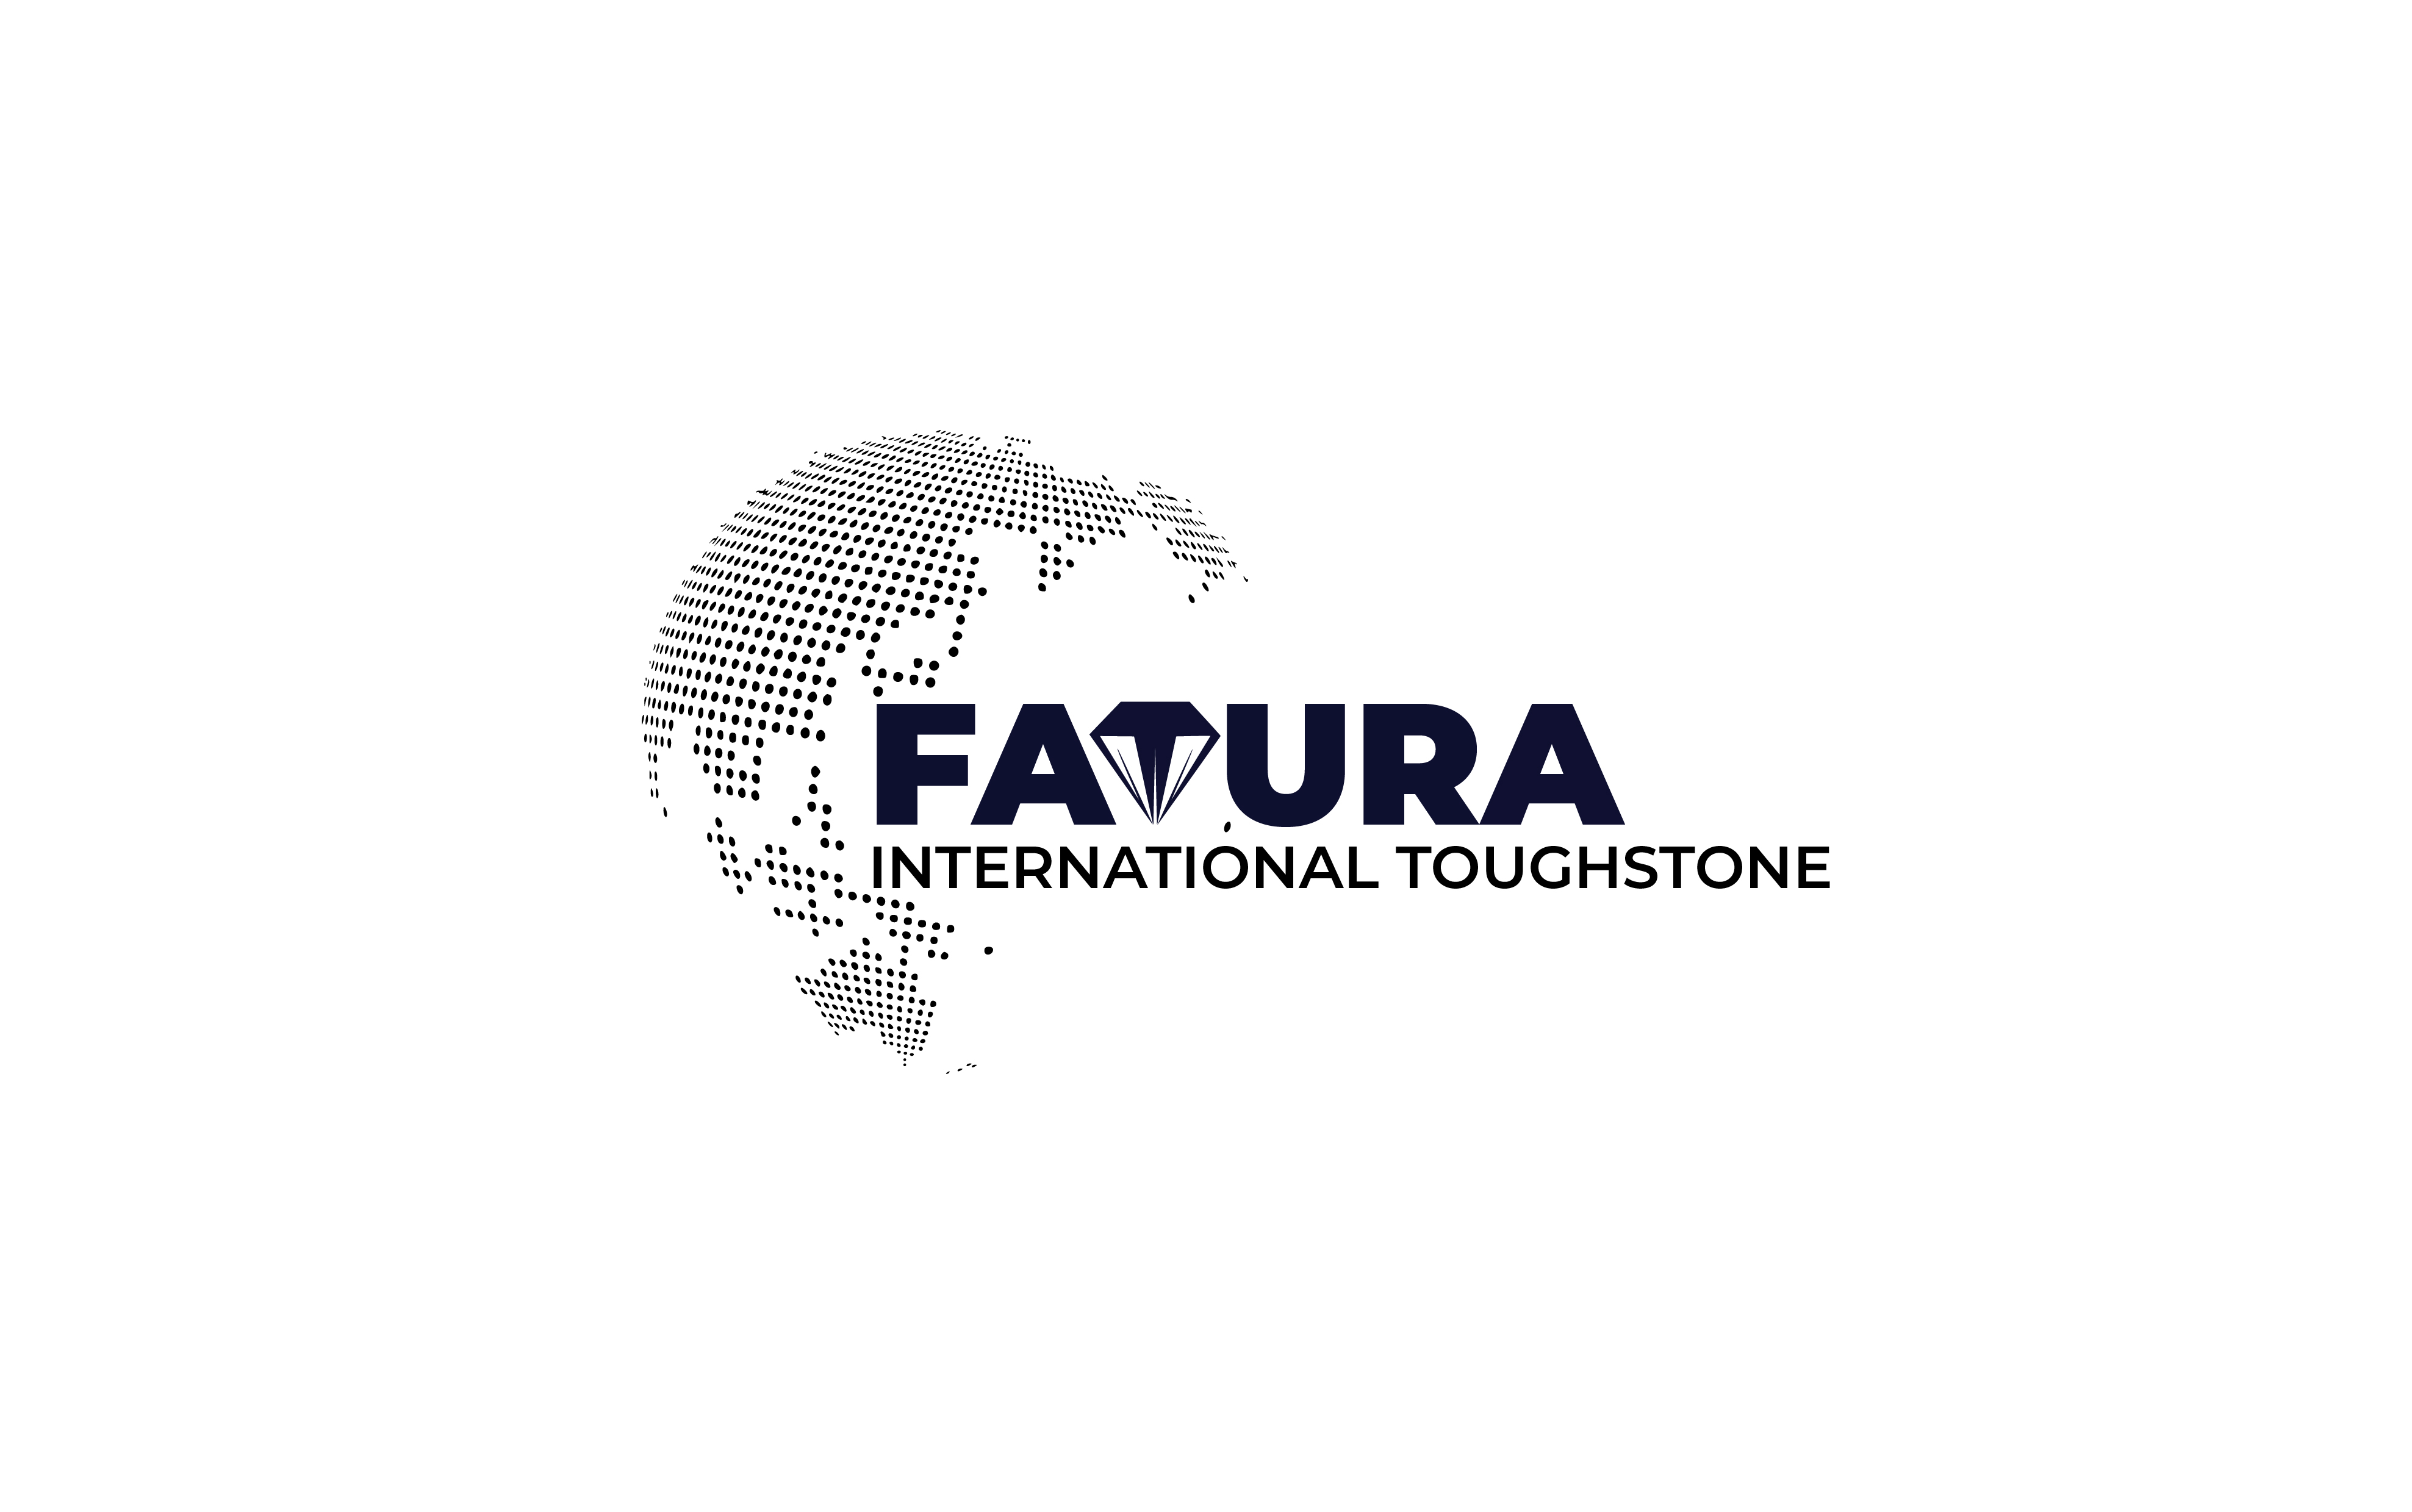 Fatura Toughstone Logo Design in Nairobi Kenya. The Best Logo Design Company in Nairobi, Kenya, Kampala, Uganda, Dar es Salaam, Kigali, Rwanda, Juba, South Sudan, and Mogadishu, Somalia is Galactik IT. Galactik IT provides corporate, governmental, non-profit, and small- and medium-sized business clients with expert logo graphics design services. With an expert working on your brand visuals at each stage, Galactik IT offers a logo design thorough process in Nairobi, Kenya that smoothly takes you from planning to post-launch. Galactik IT never skimped on quality. Galactik IT builds beautifully made, effective logo by by hand. Logo, company profile, business card, letterhead, brochure, social media posters, flyers designers in nairobi kenya